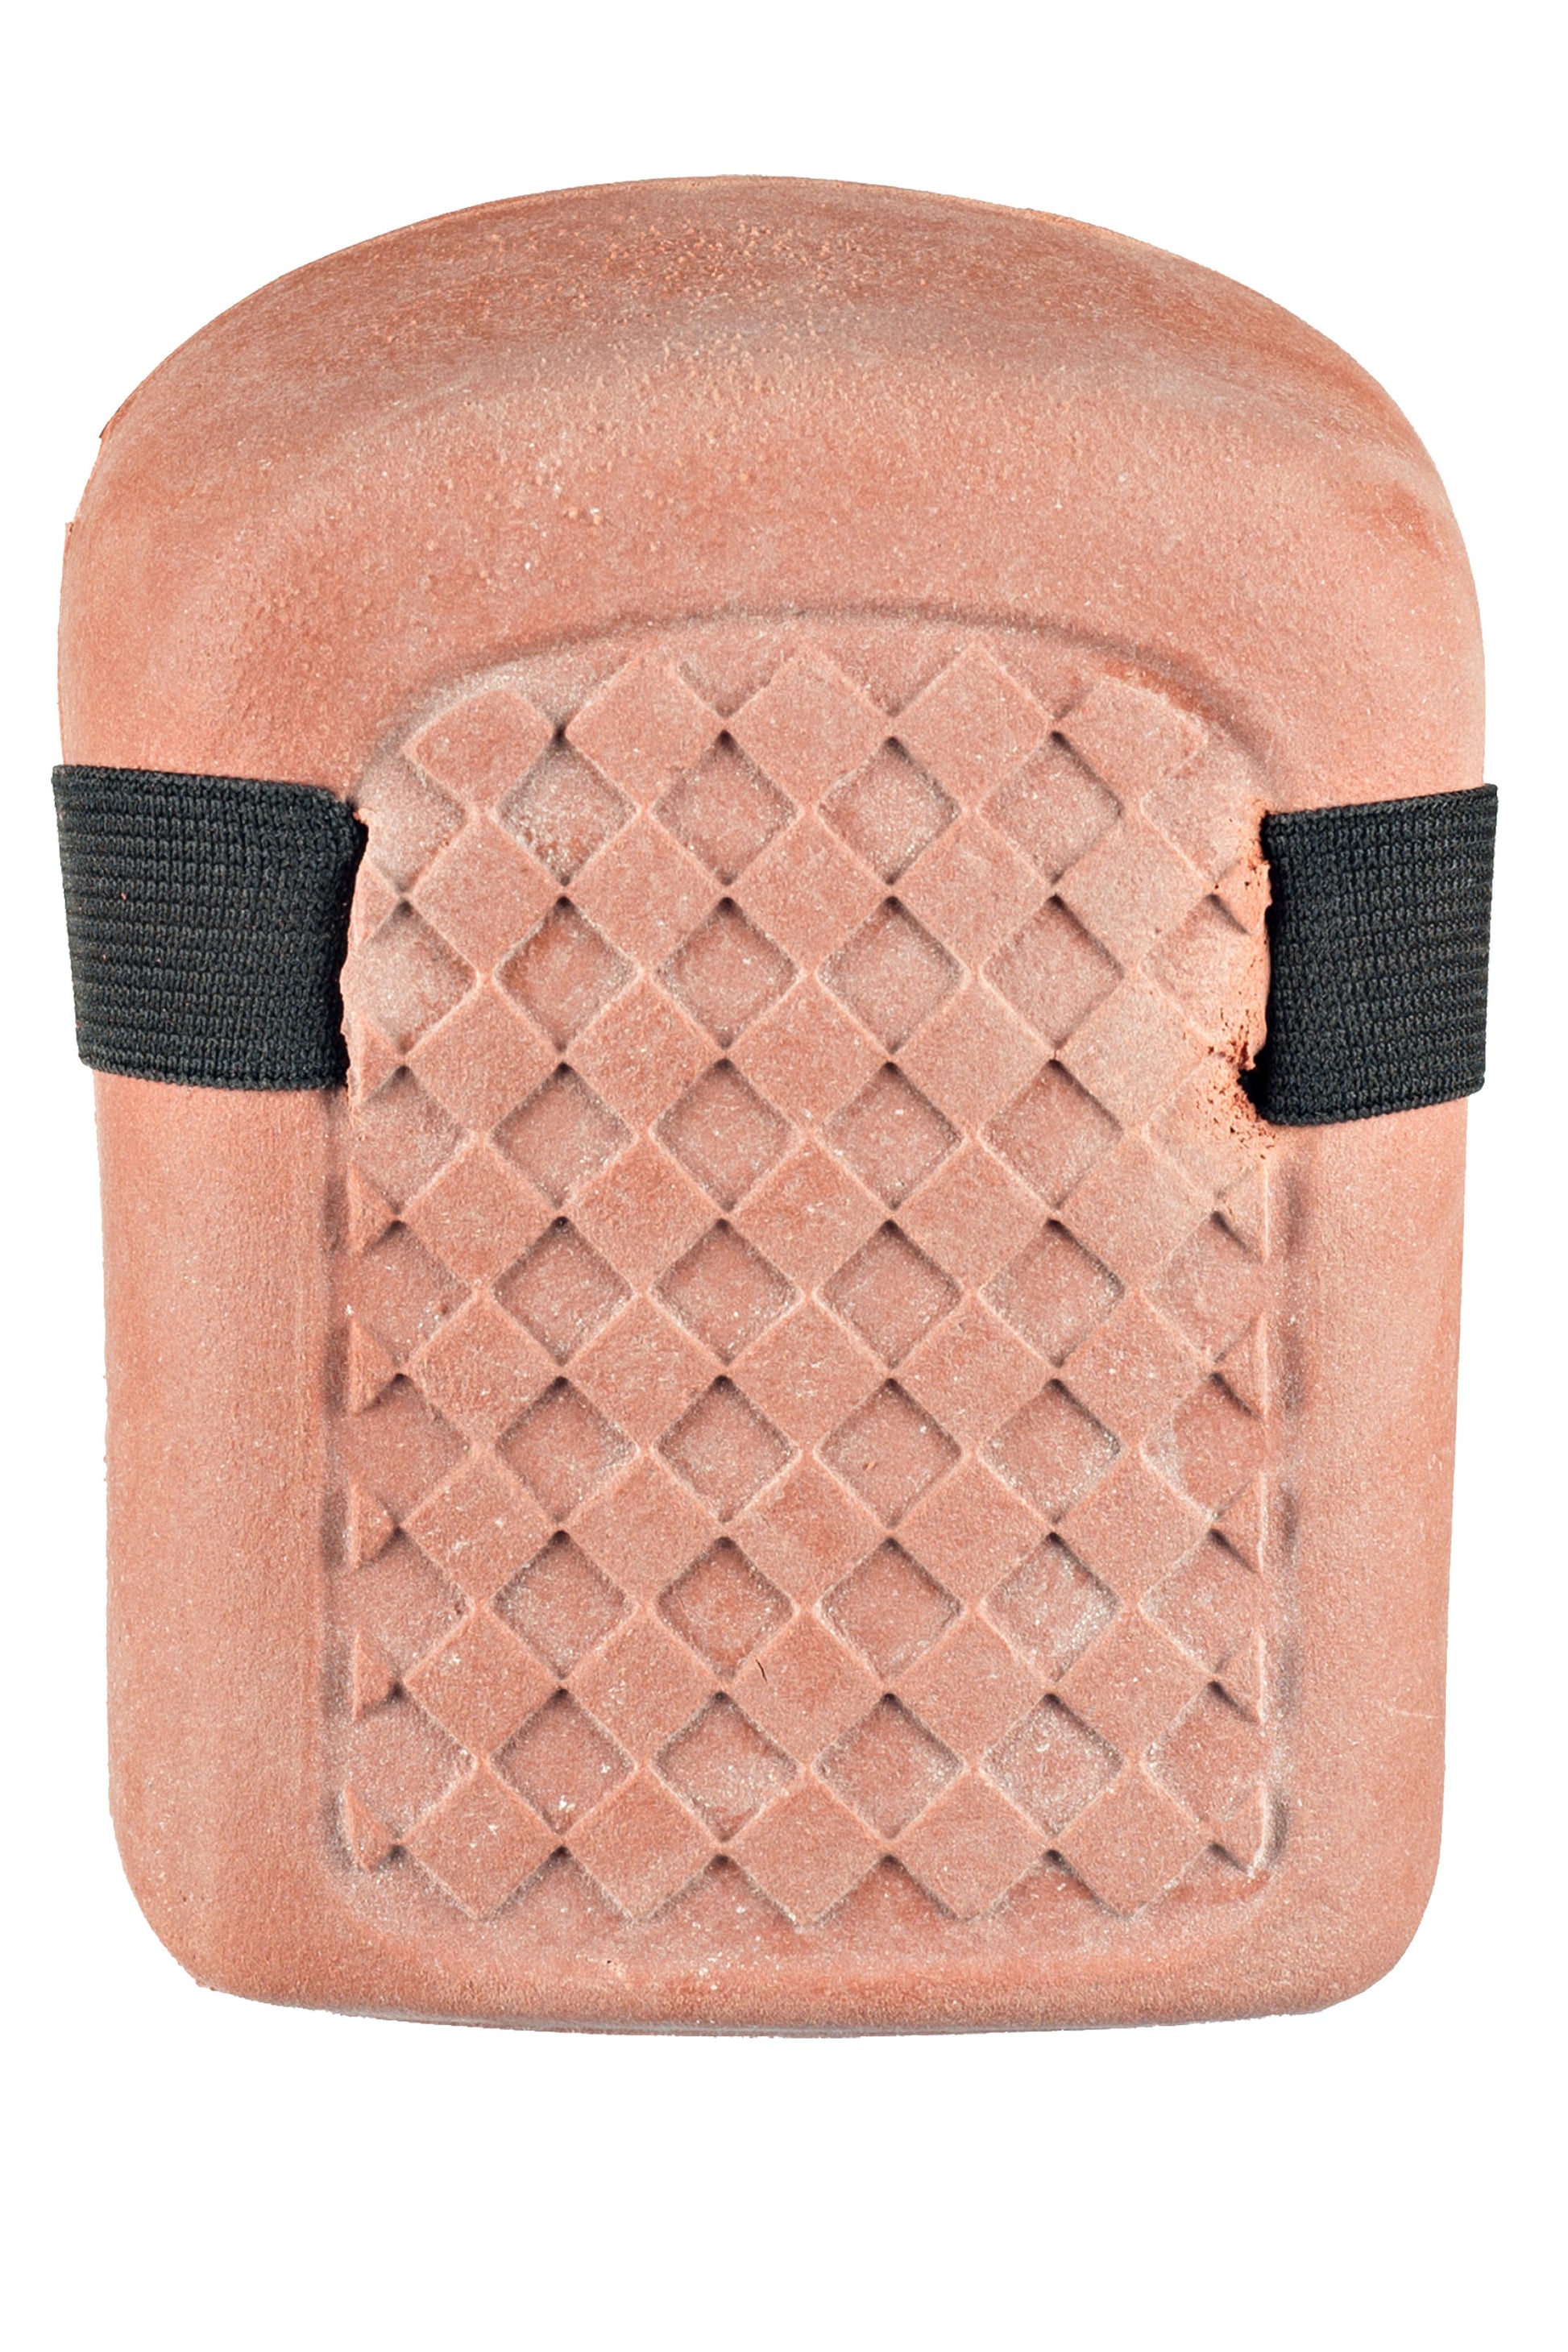 ALTA Rubber Knee Pad with elastic strap - 100 percent rubber